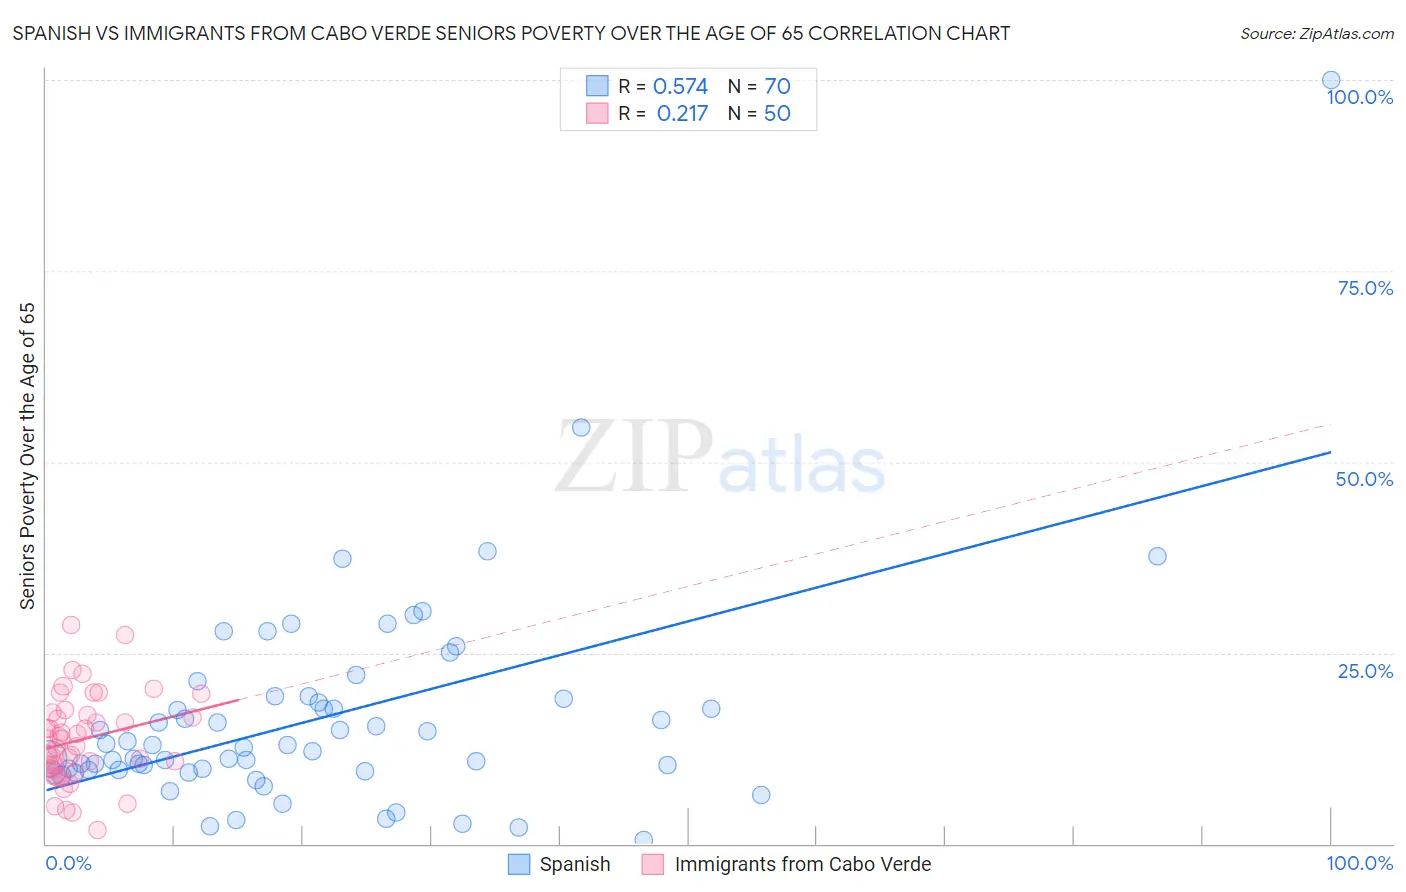 Spanish vs Immigrants from Cabo Verde Seniors Poverty Over the Age of 65